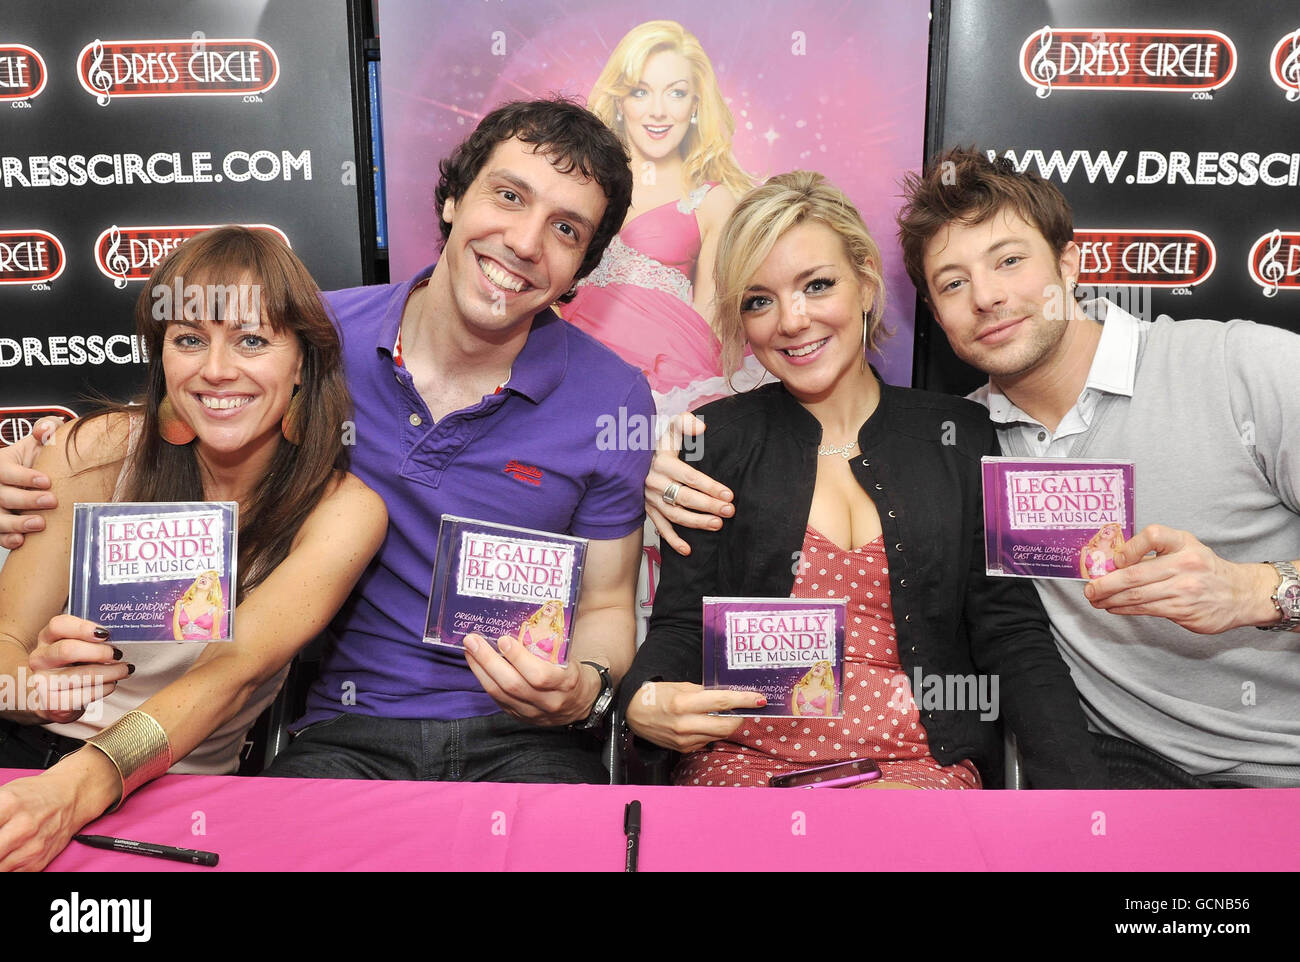 (left to right) Jill Halfpenny, Alex Gaumond, Sheridan Smith and Duncan James, some of the cast of hit musical Legally Blonde, at an album signing session at the Dress Circle shop in London's Covent Garden. Stock Photo